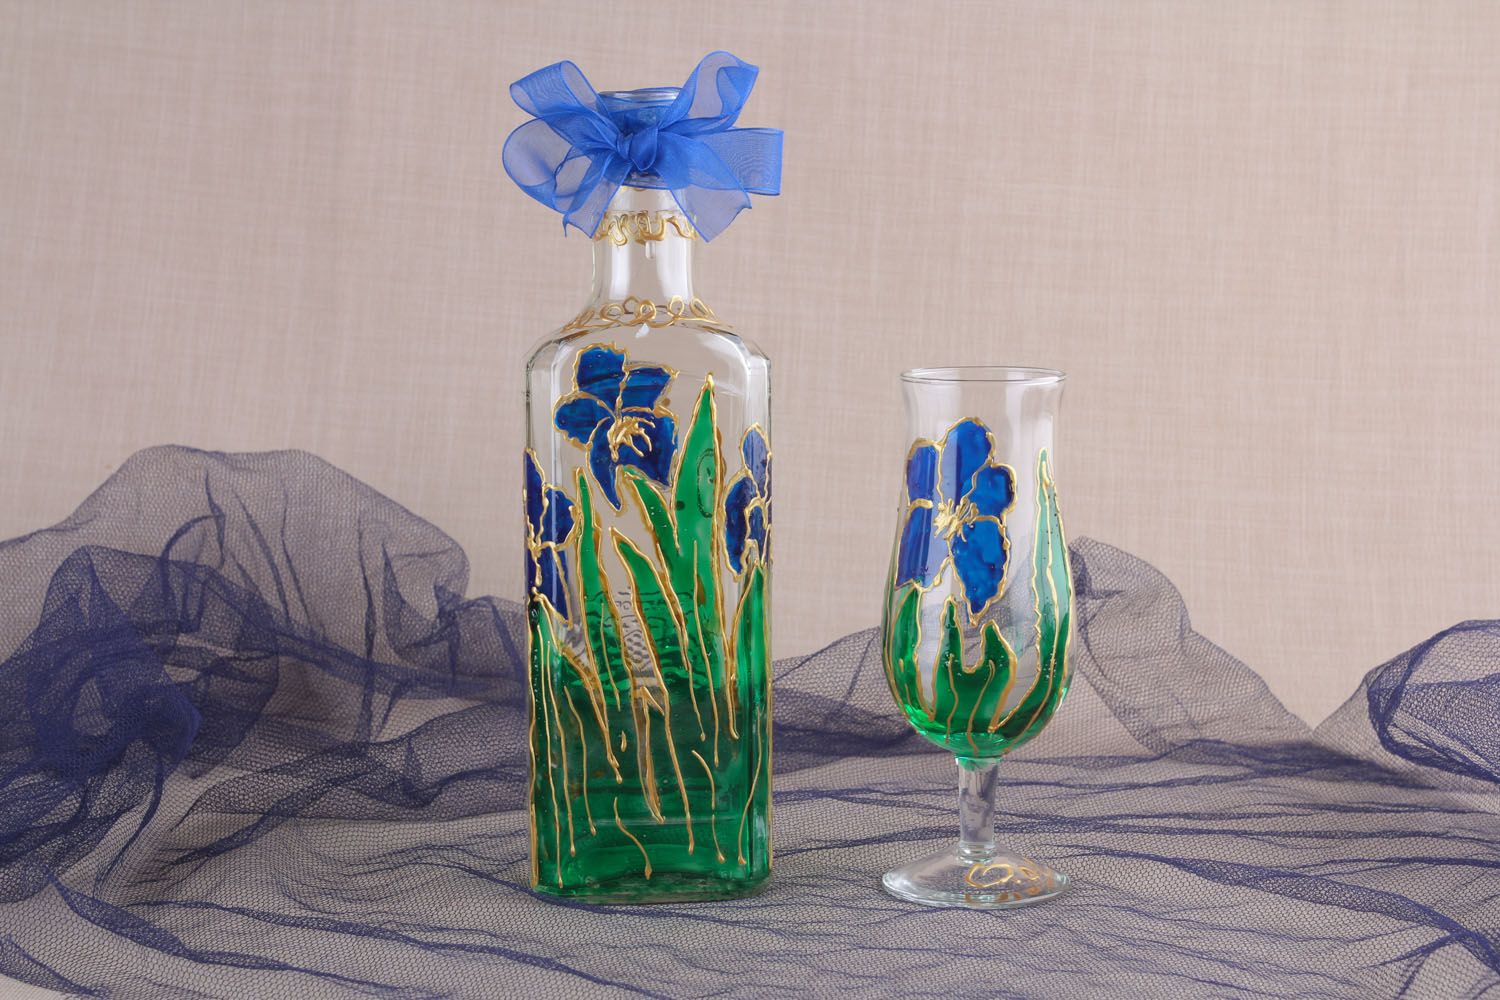 Painted bottle and glass photo 1